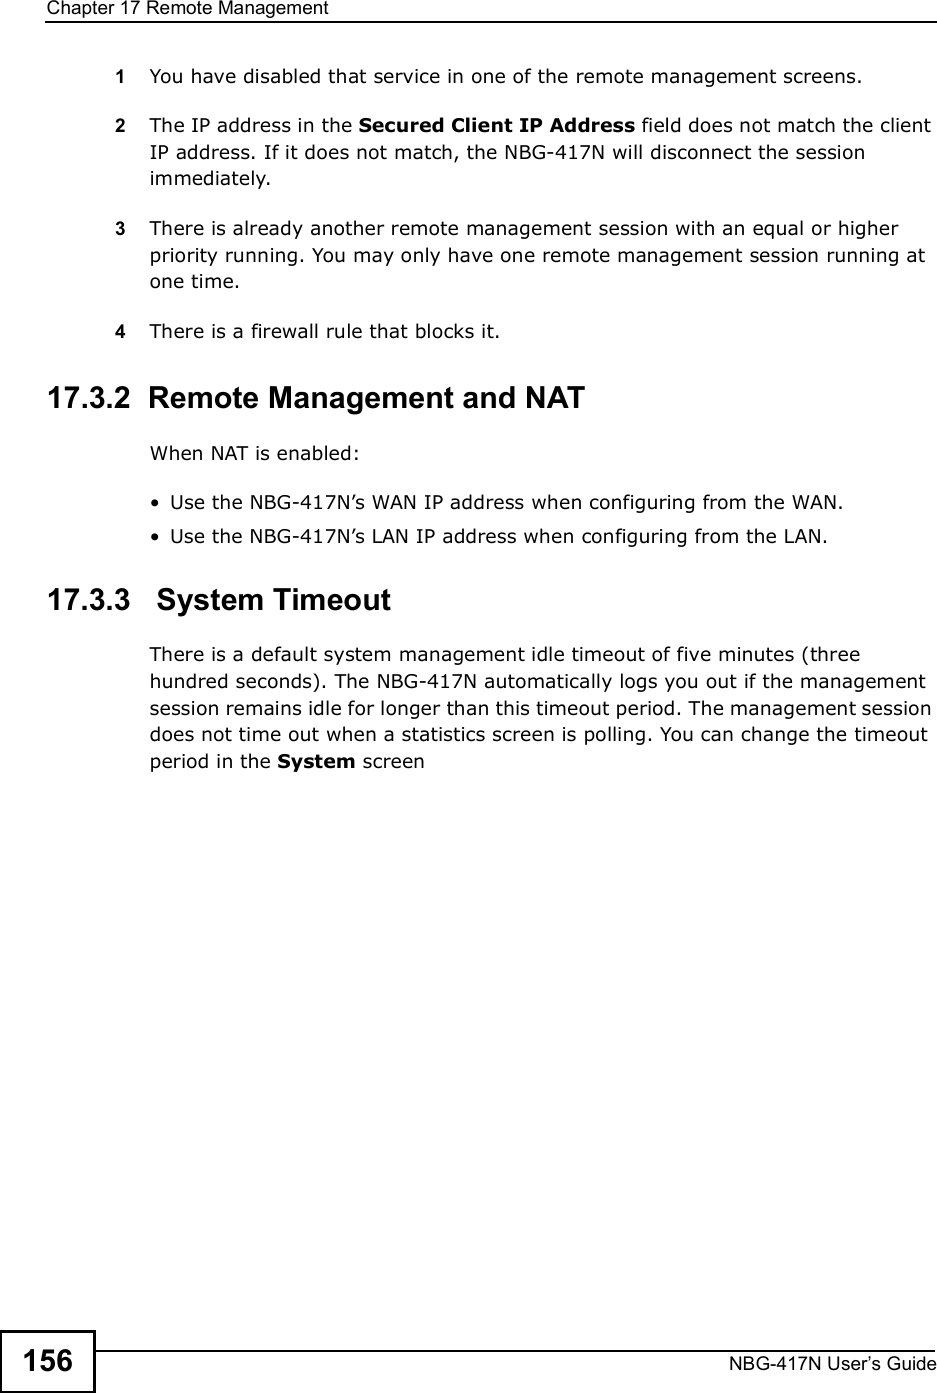 Chapter 17Remote ManagementNBG-417N User s Guide1561You have disabled that service in one of the remote management screens.2The IP address in the Secured Client IP Address field does not match the client IP address. If it does not match, the NBG-417N will disconnect the session immediately.3There is already another remote management session with an equal or higher priority running. You may only have one remote management session running at one time.4There is a firewall rule that blocks it.17.3.2  Remote Management and NATWhen NAT is enabled: Use the NBG-417N!s WAN IP address when configuring from the WAN.  Use the NBG-417N!s LAN IP address when configuring from the LAN.17.3.3   System TimeoutThere is a default system management idle timeout of five minutes (three hundred seconds). The NBG-417N automatically logs you out if the management session remains idle for longer than this timeout period. The management session does not time out when a statistics screen is polling. You can change the timeout period in the System screen